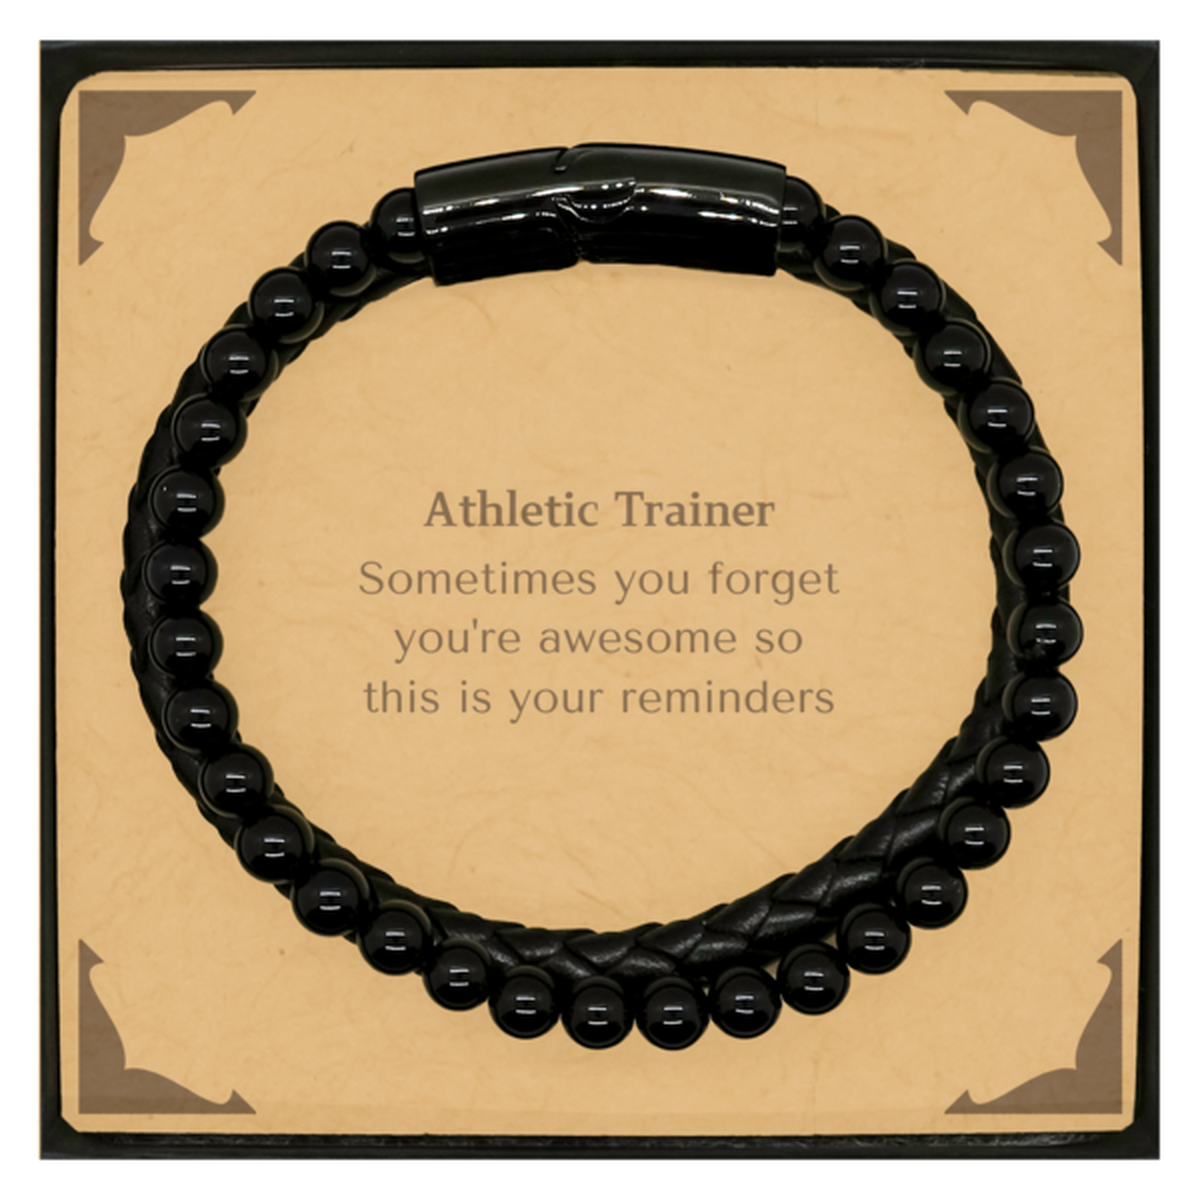 Sentimental Athletic Trainer Stone Leather Bracelets, Athletic Trainer Sometimes you forget you're awesome so this is your reminders, Graduation Christmas Birthday Gifts for Athletic Trainer, Men, Women, Coworkers